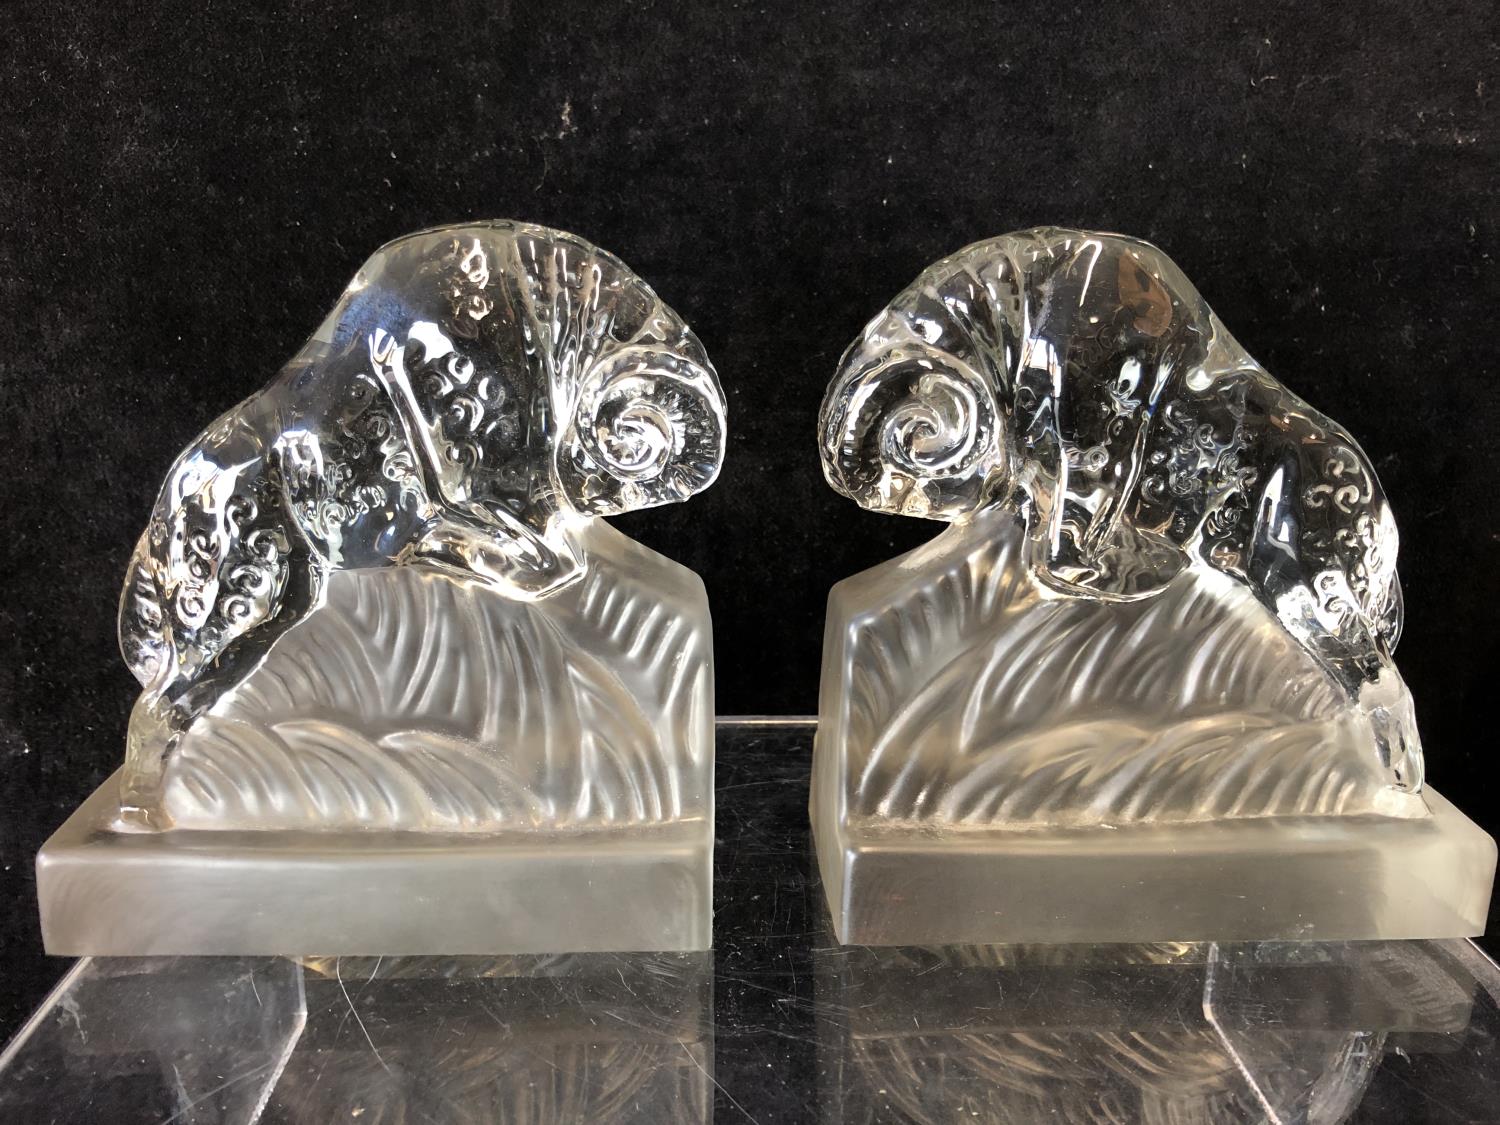 A pair of Art Deco glass book ends modelled as charging rams, by the Libochovice glass company and